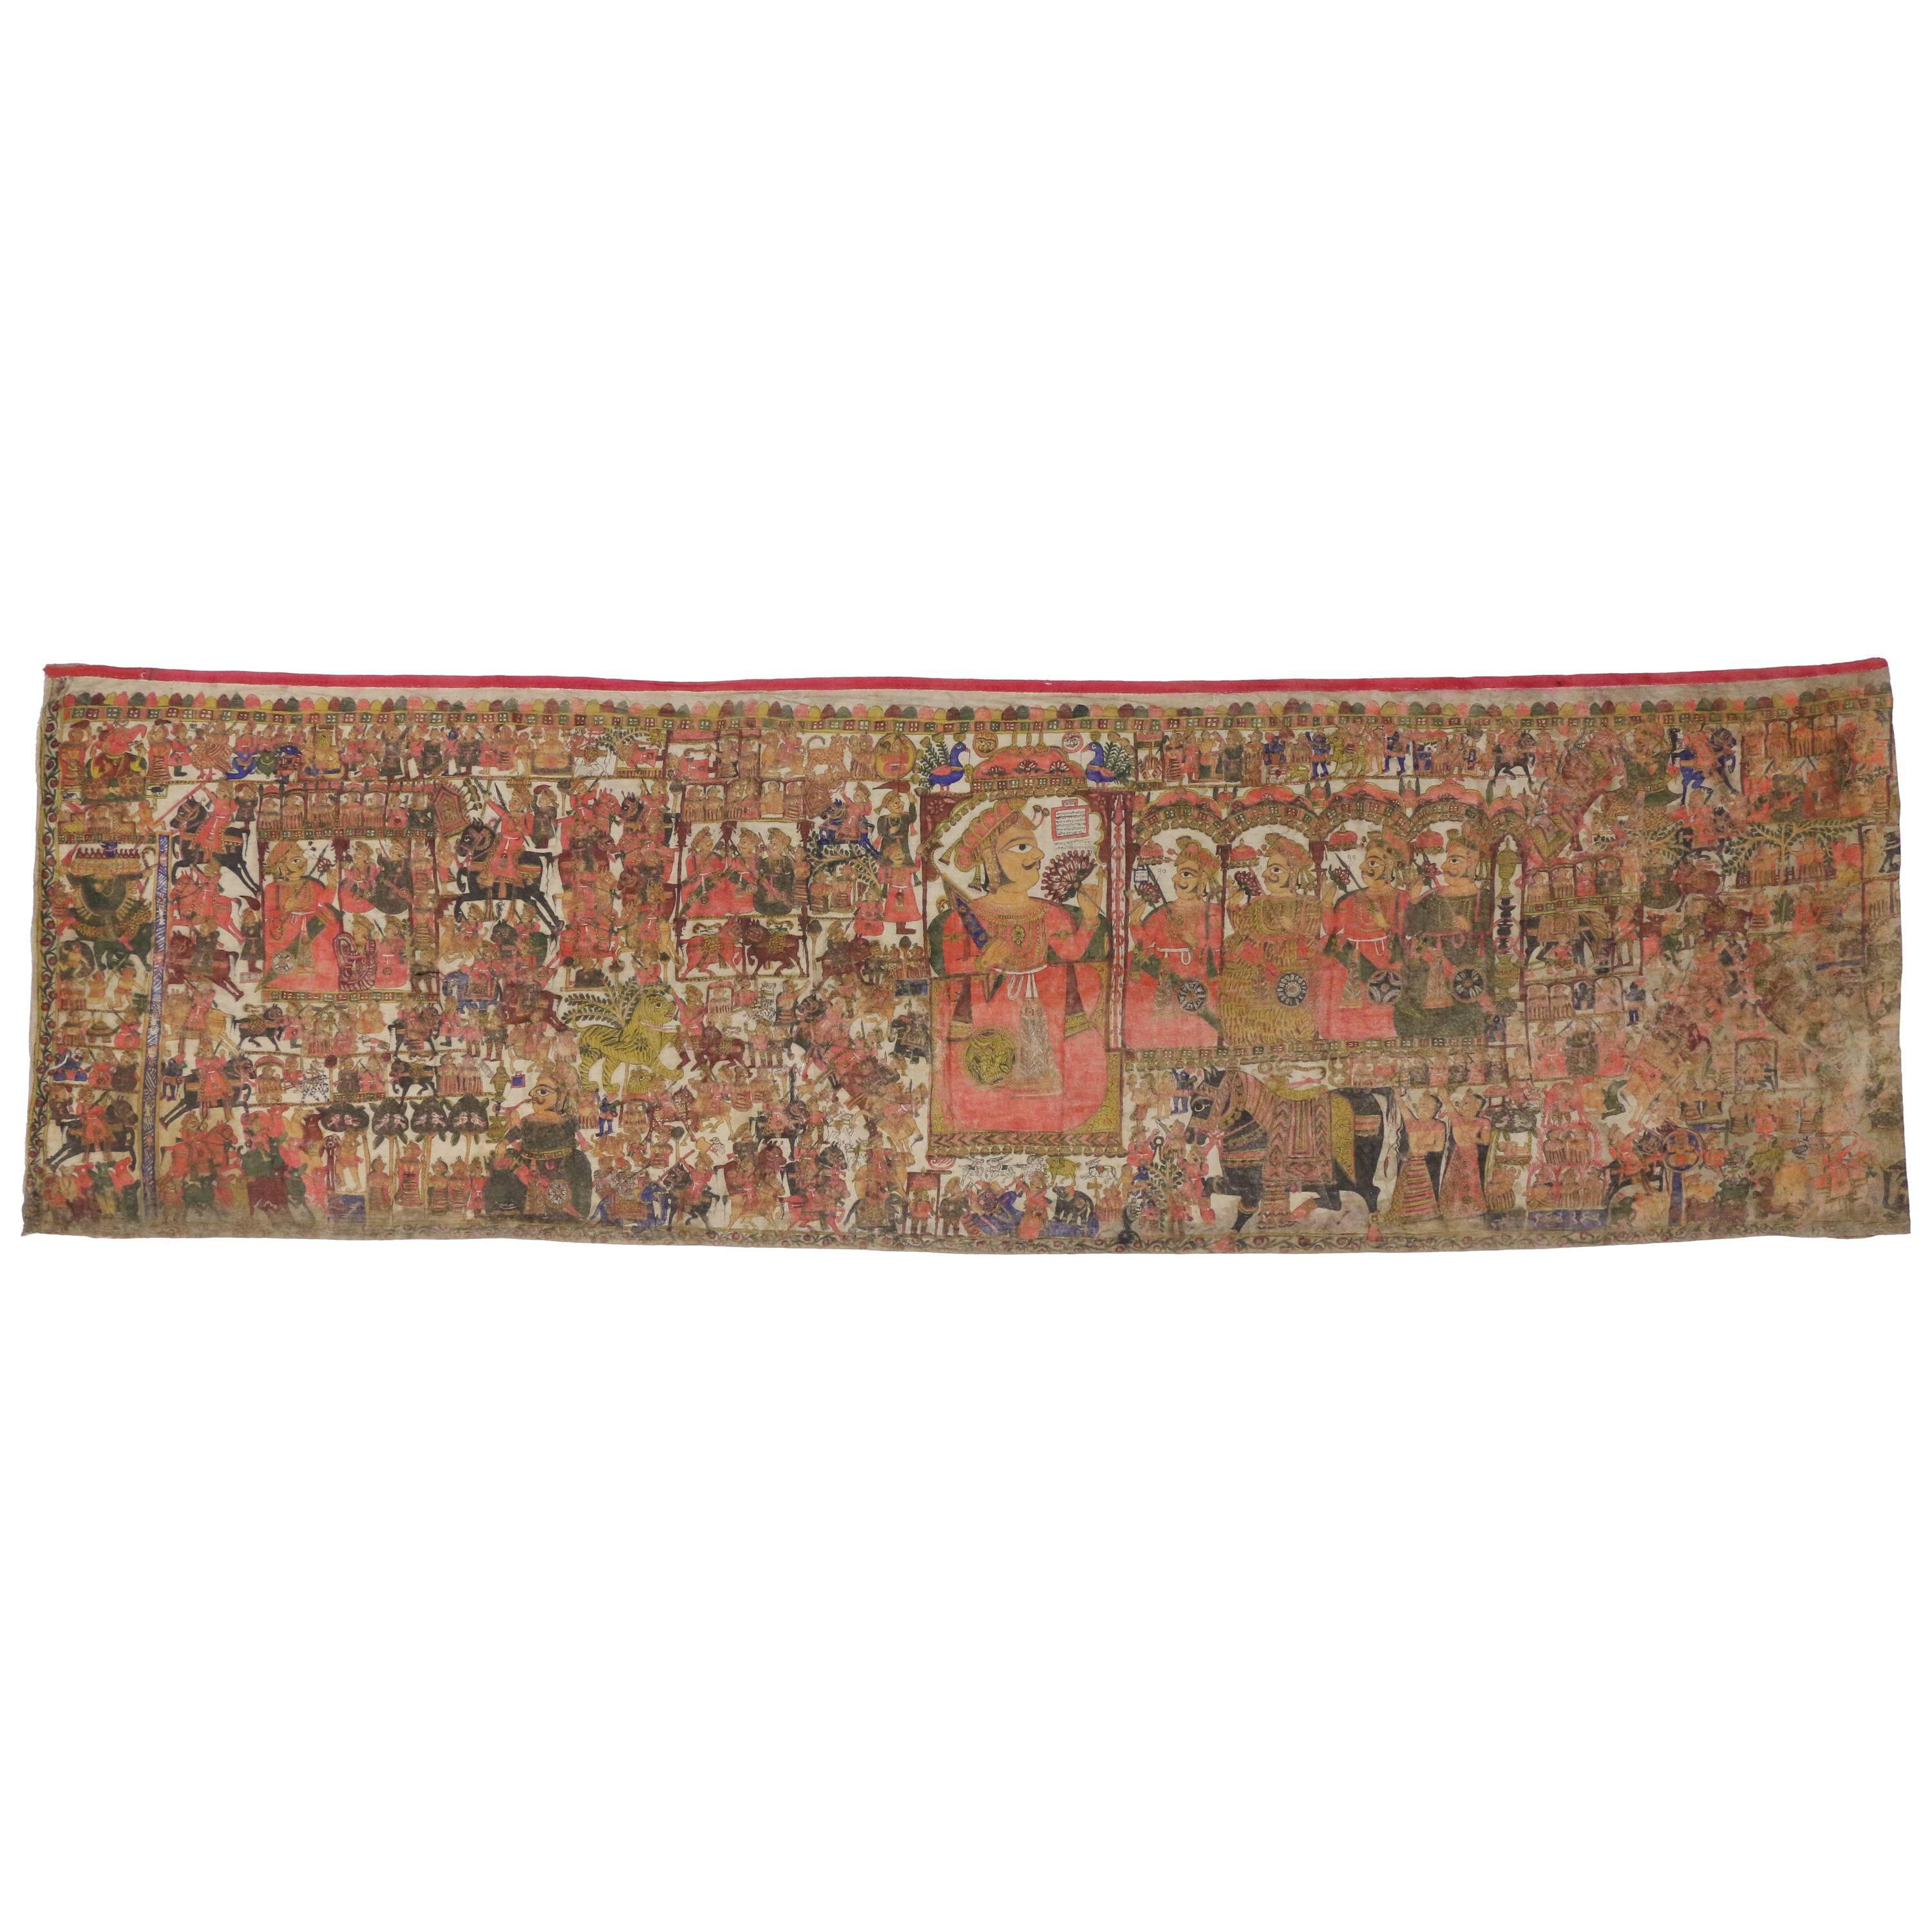 18th Century Antique Indian Medieval Tapestry after the Battle of Karnal in 1739 For Sale